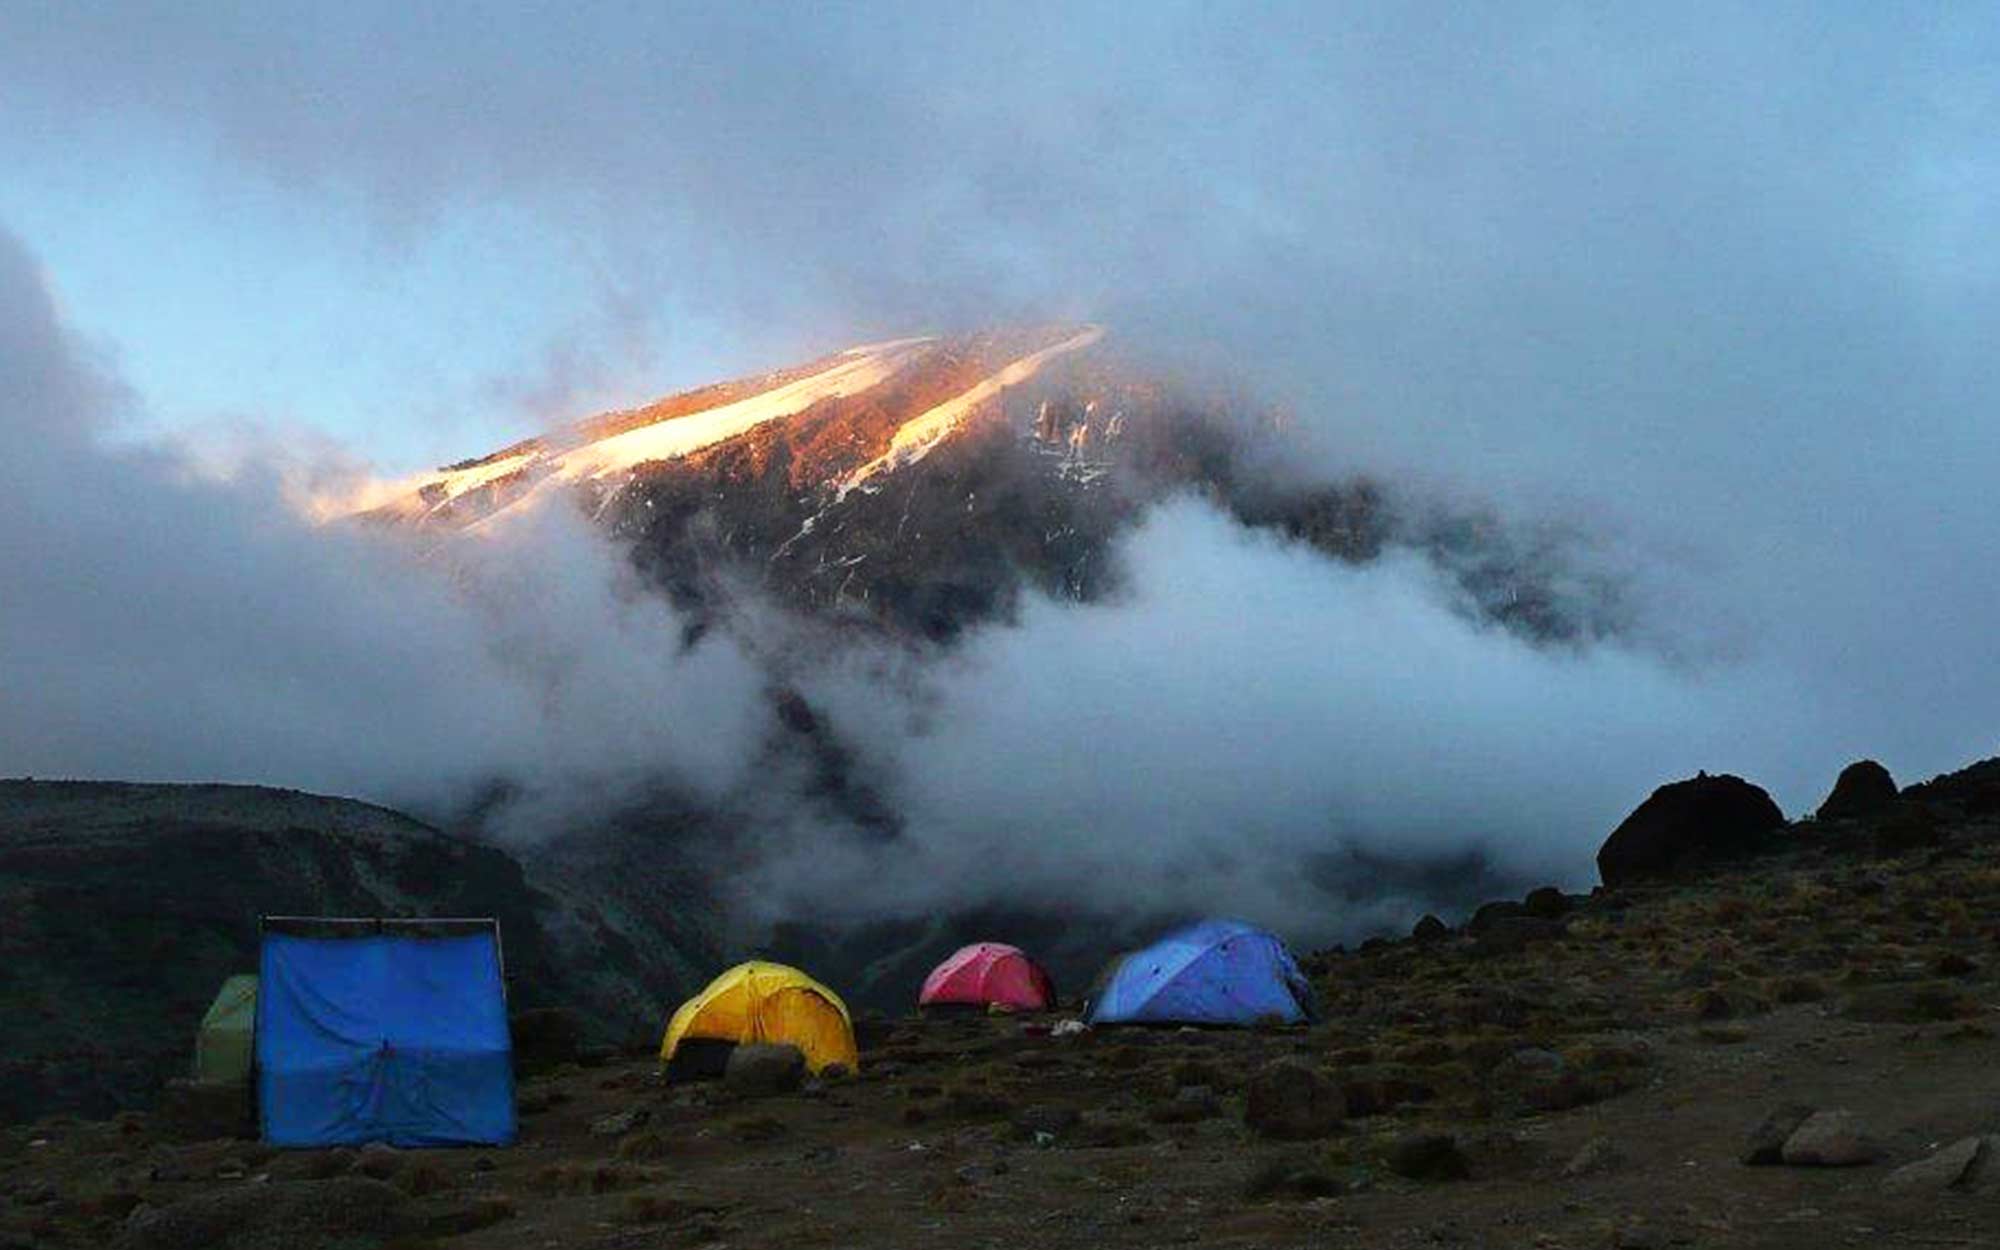 a group of tents are pitched on the ground with Mount Kilimanjaro's peak visible in the background